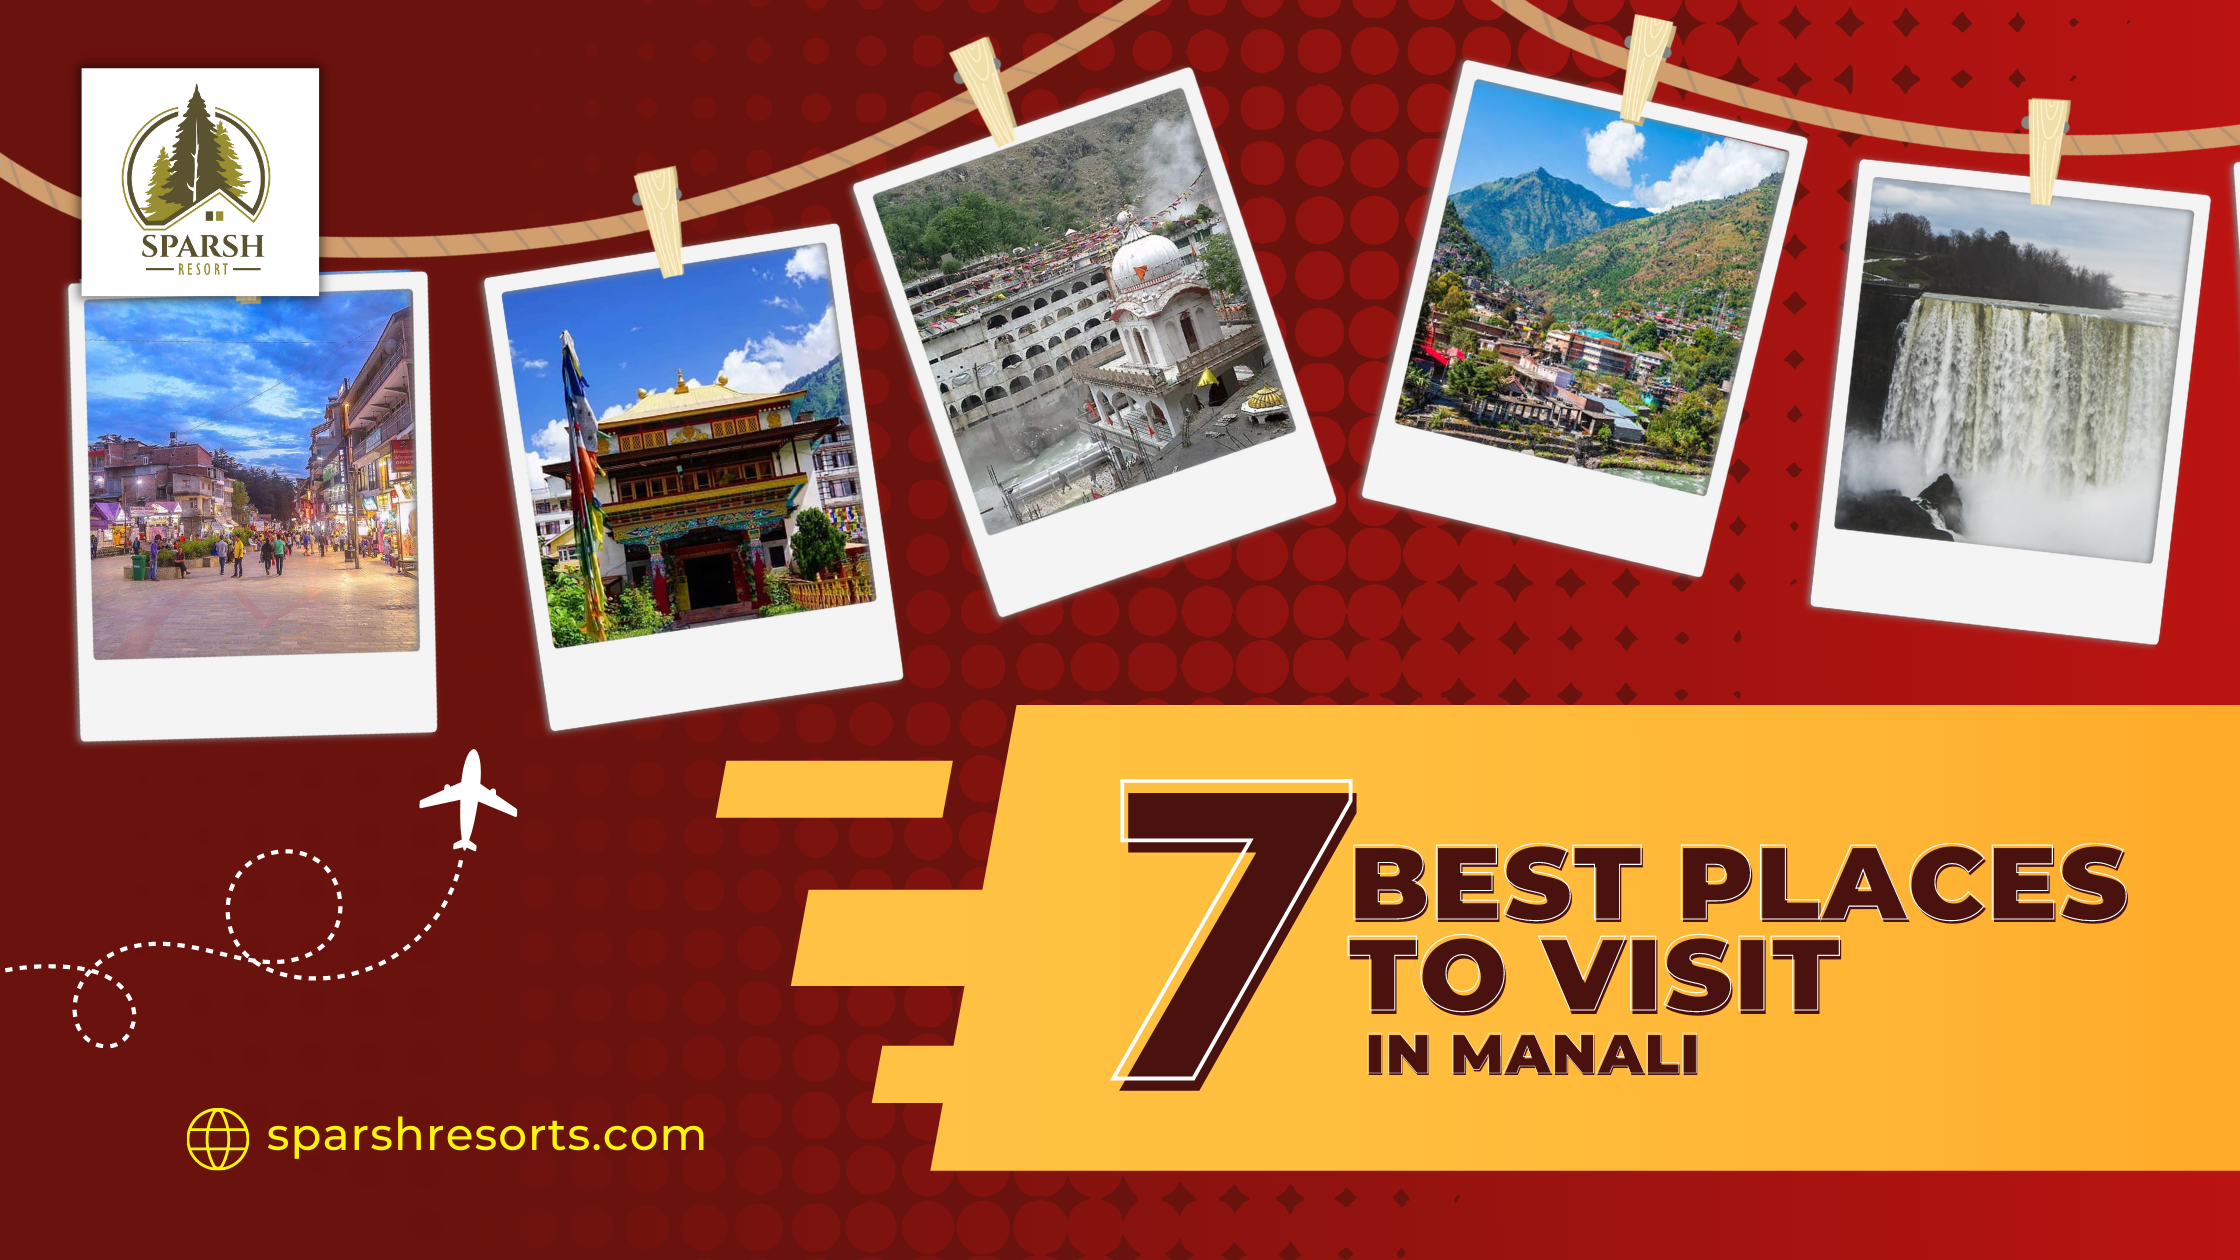 7 Best Places to Visit in Manali - Sparsh Resort